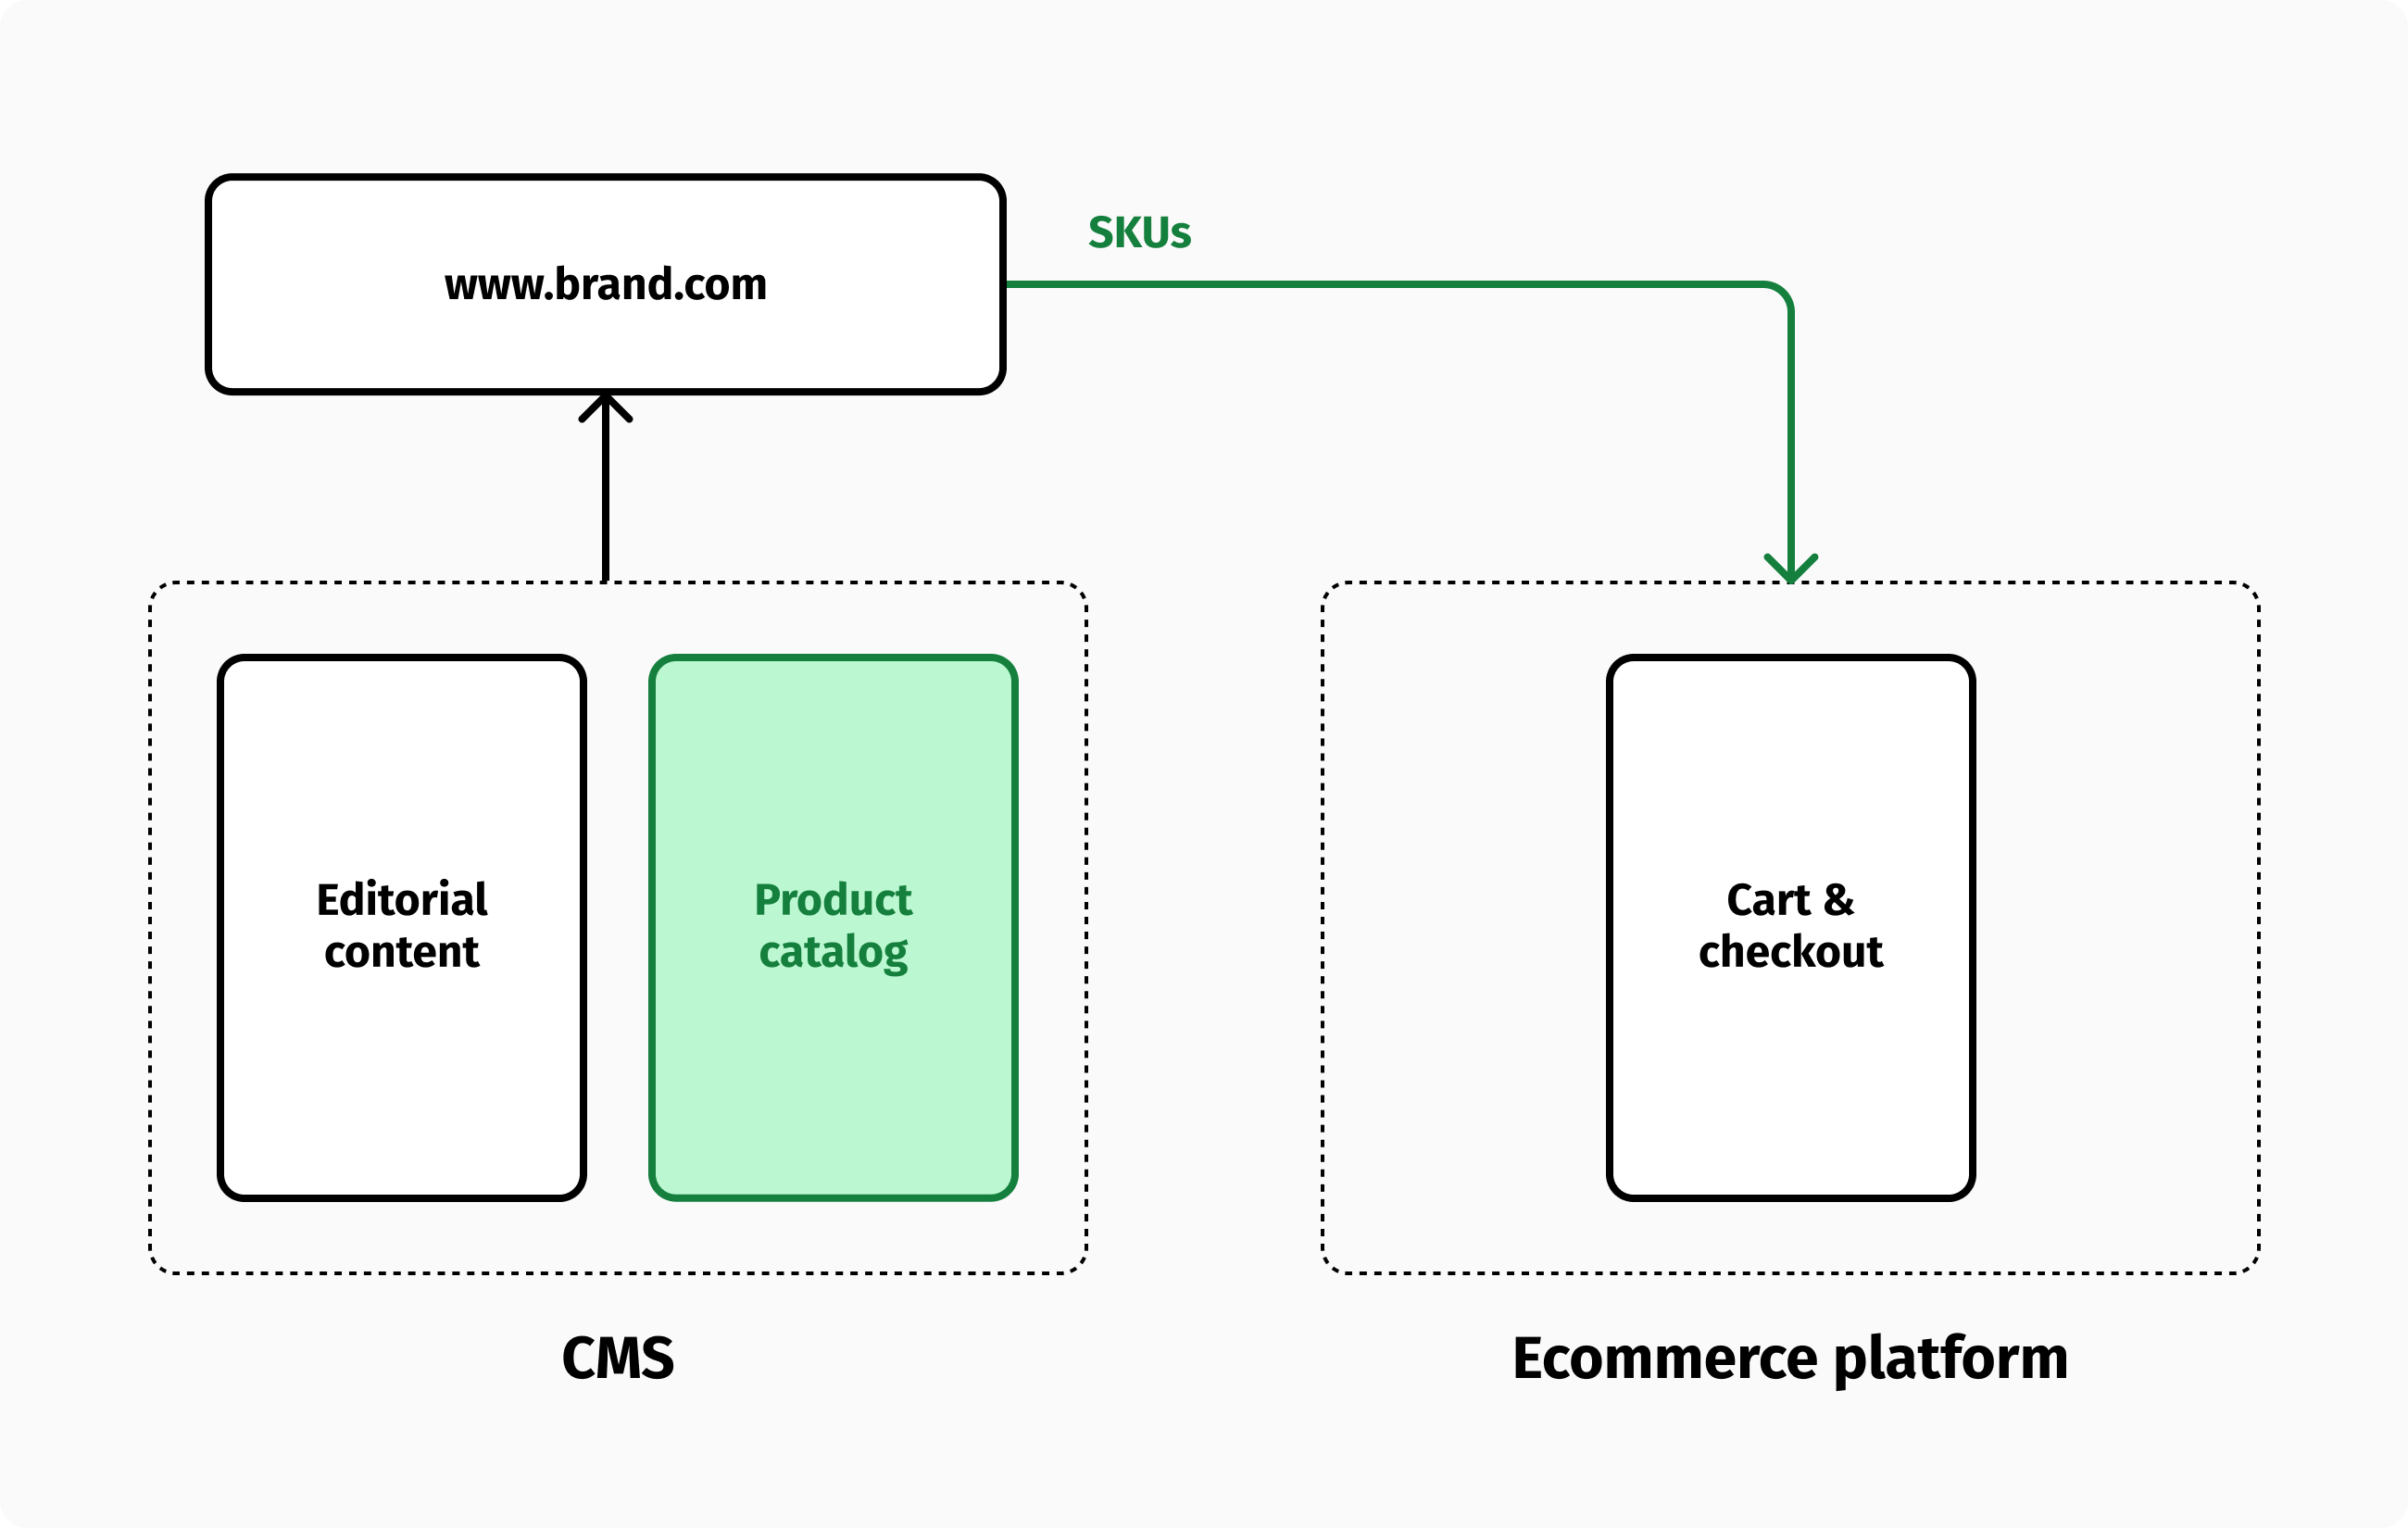 You can make your stack much cleaner by moving the product catalog to the CMS.